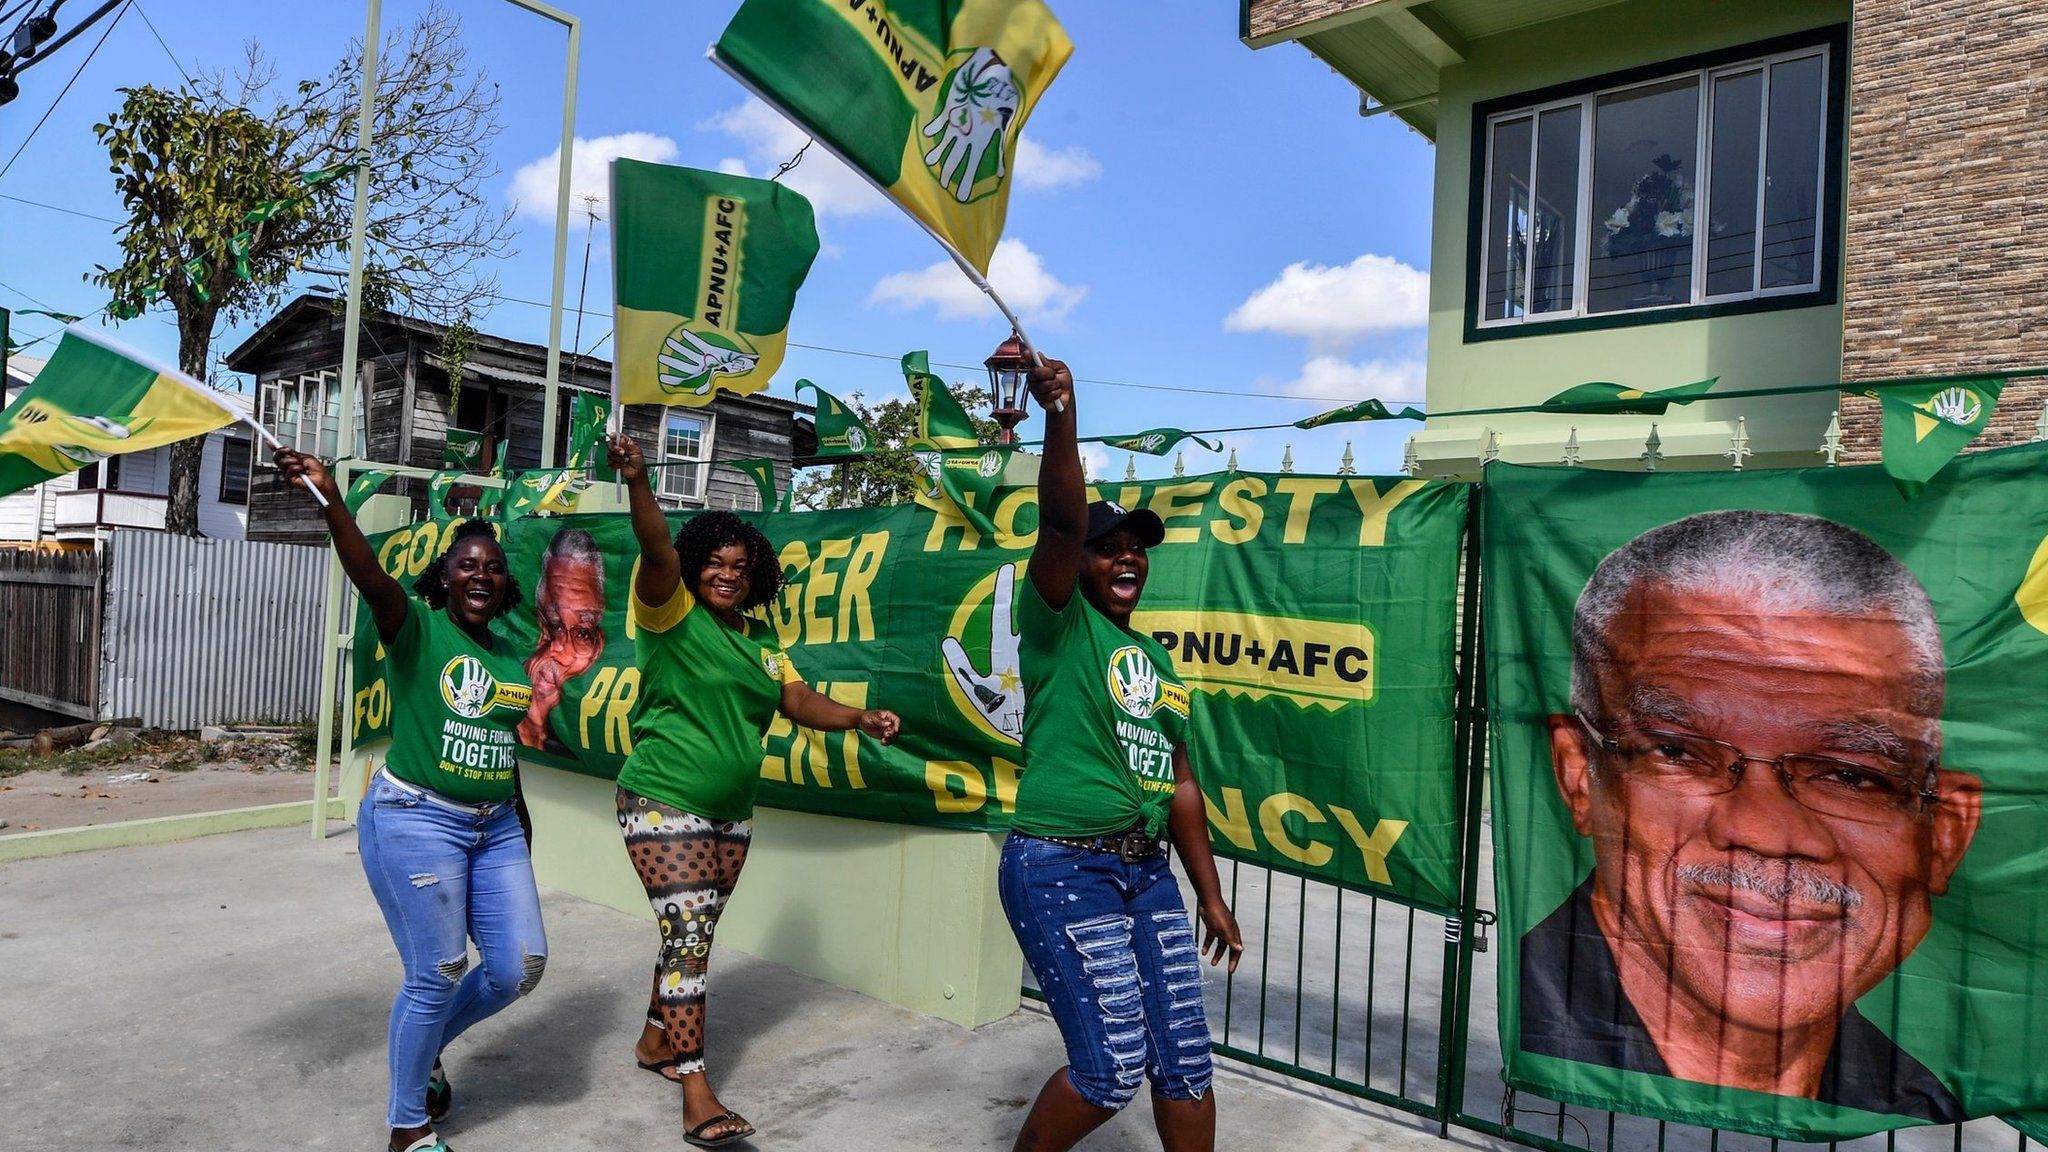 Supporters of presidential candidate David Granger, of the National Unity and Alliance for Change (ANPU-AFC) party, cheer and wave flags in front of their house in Georgetown, Guyana, on 1 March, 2020.